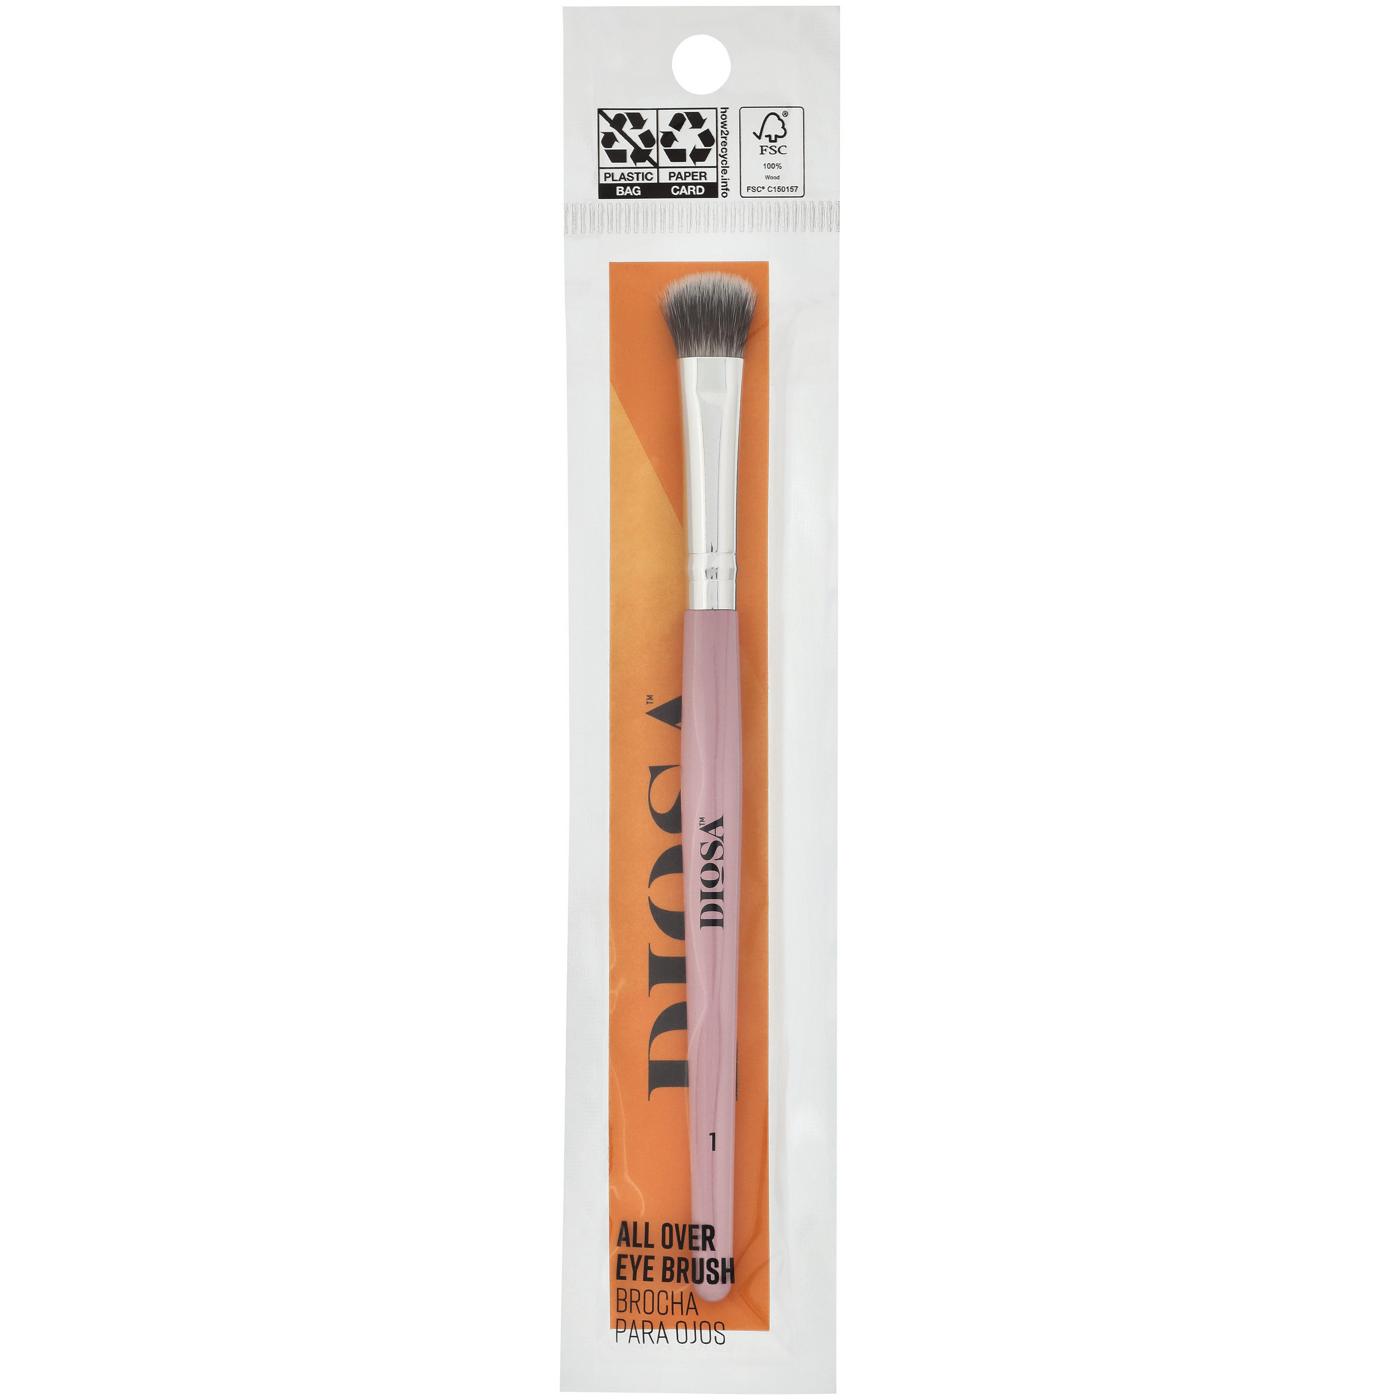 Diosa All Over Eye Brush - 1; image 1 of 2